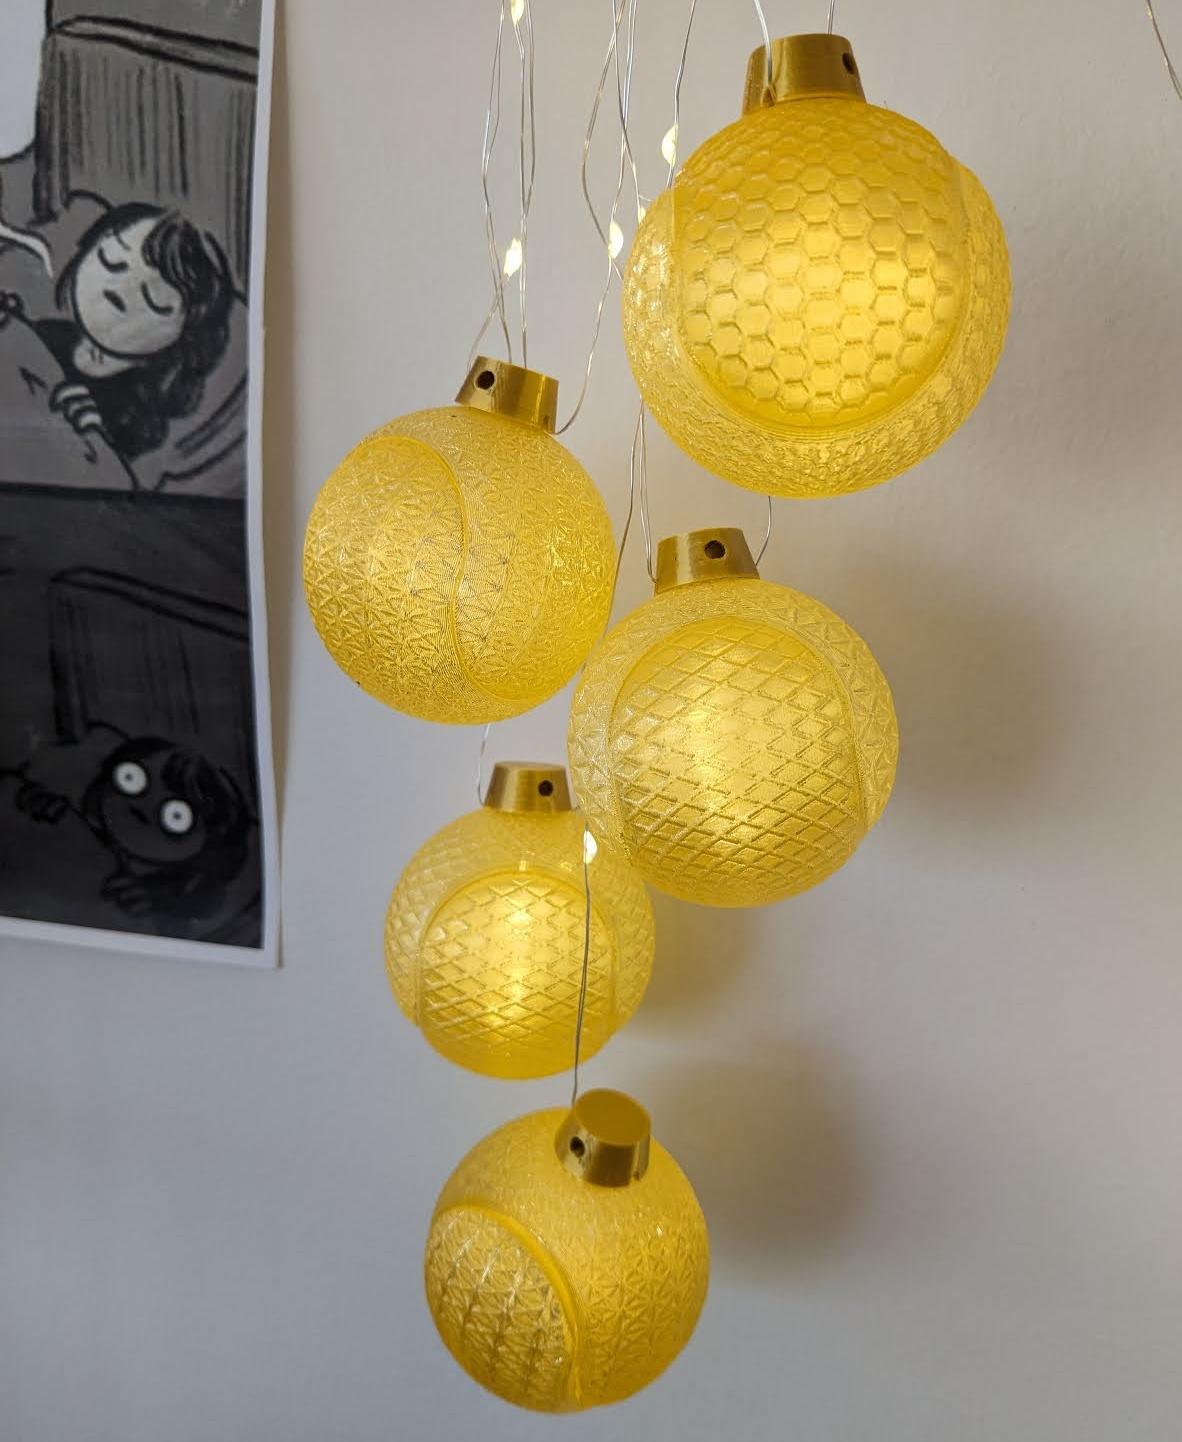 Spiralized Ornaments  - Beautiful and light and strong.  They print so well, and they look great in transparent as mentioned.  The spheres are an amazing design and the textures are wonderful. - 3d model